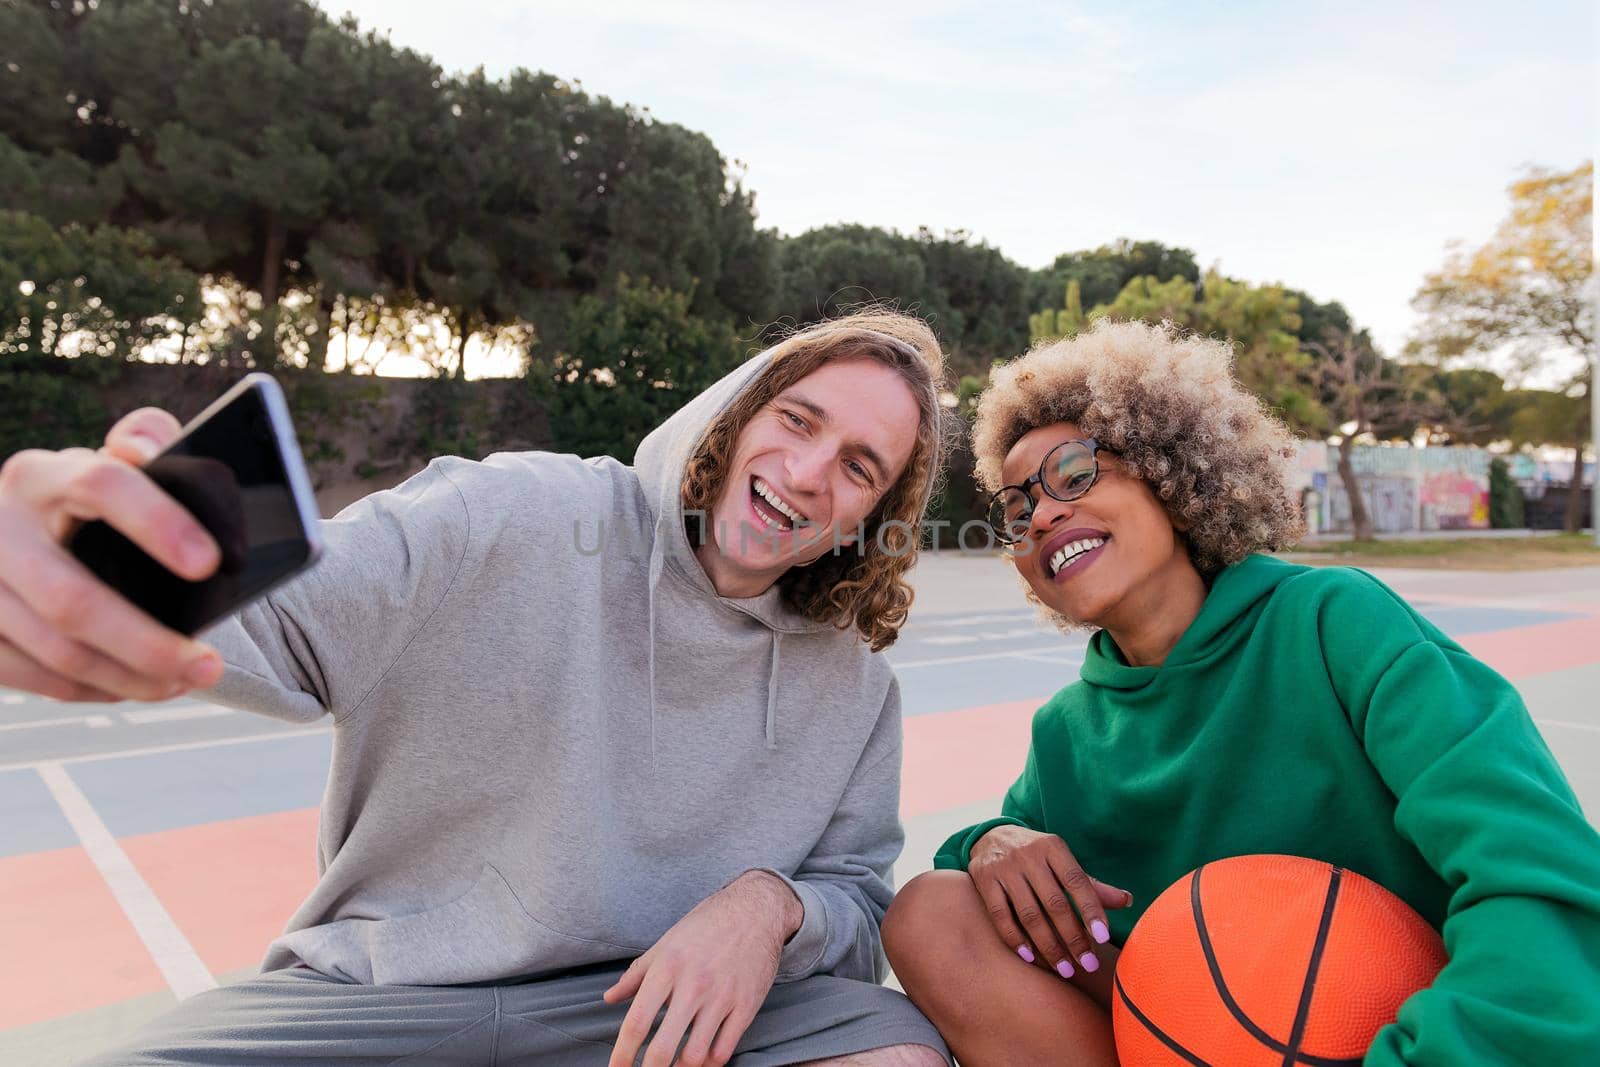 man and woman sharing a good time taking a selfie with the phone after playing basketball in a city park, concept of friendship and urban sport in the street, copy space for text